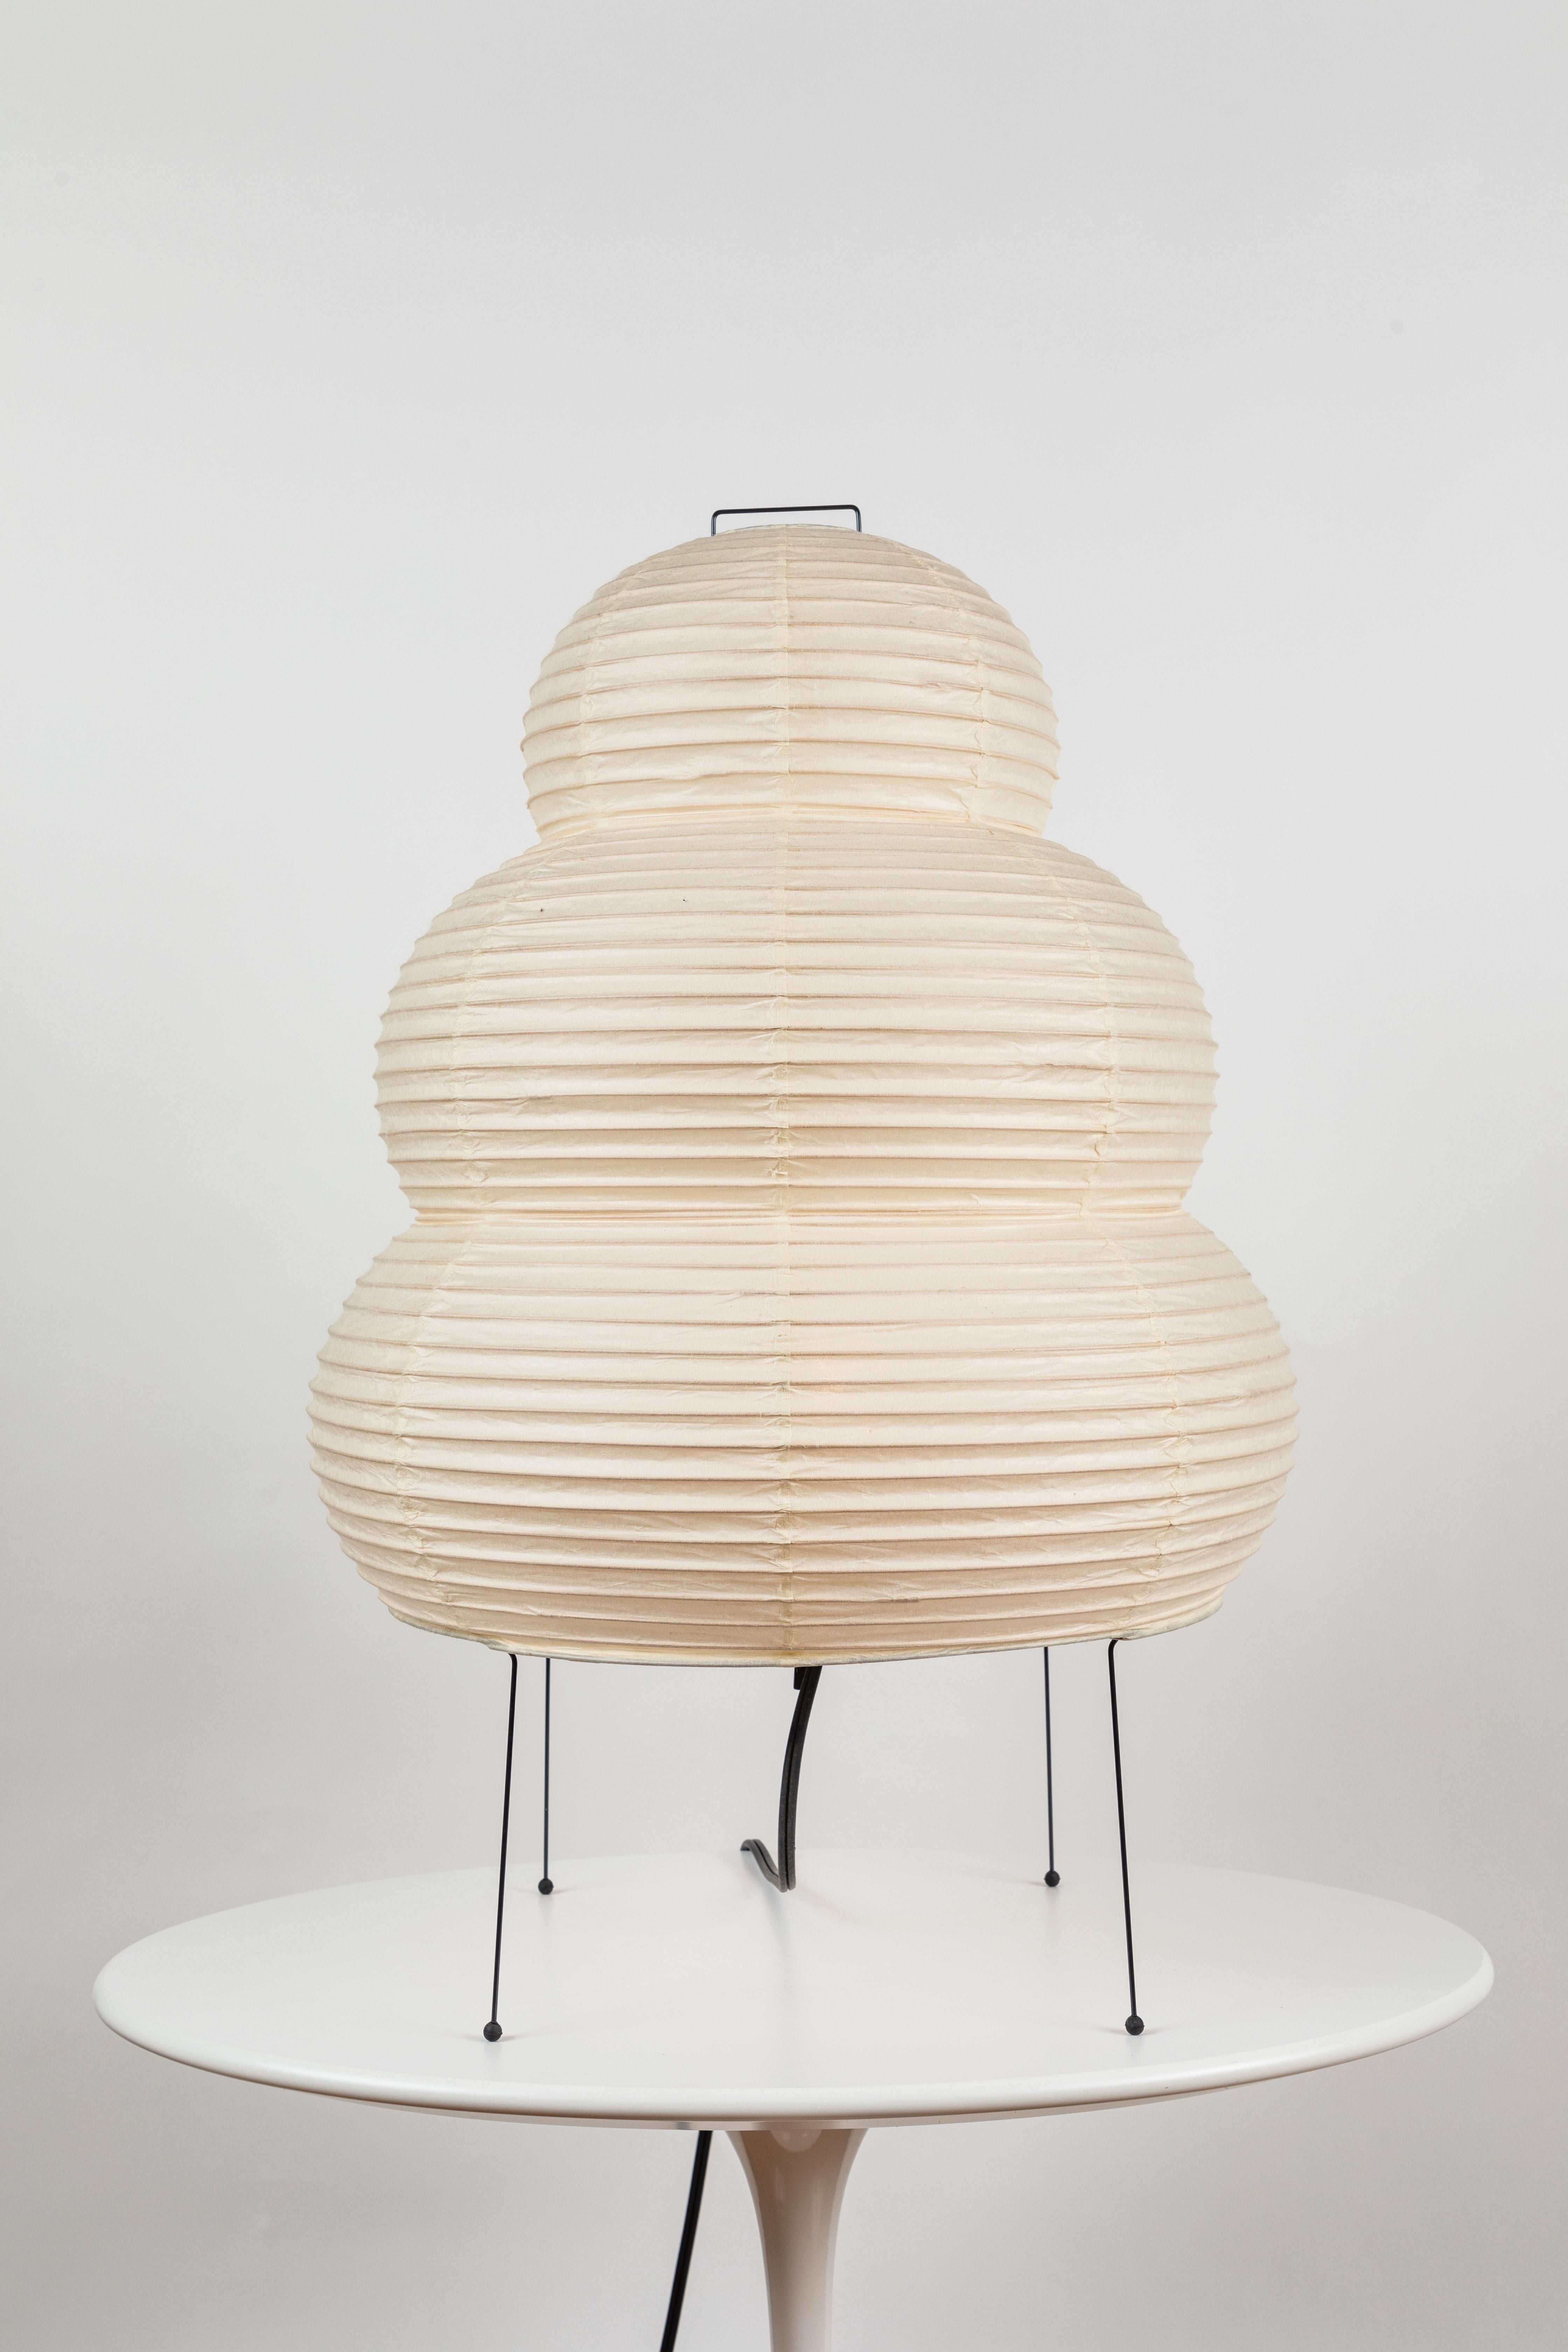 Akari model 20N light sculpture by Isamu Noguchi. The shade is made from handmade washi paper and bamboo ribs with Noguchi Akari manufacturer's stamp. Akari light sculptures by Isamu Noguchi are considered icons of 1950s modern design. Designed by